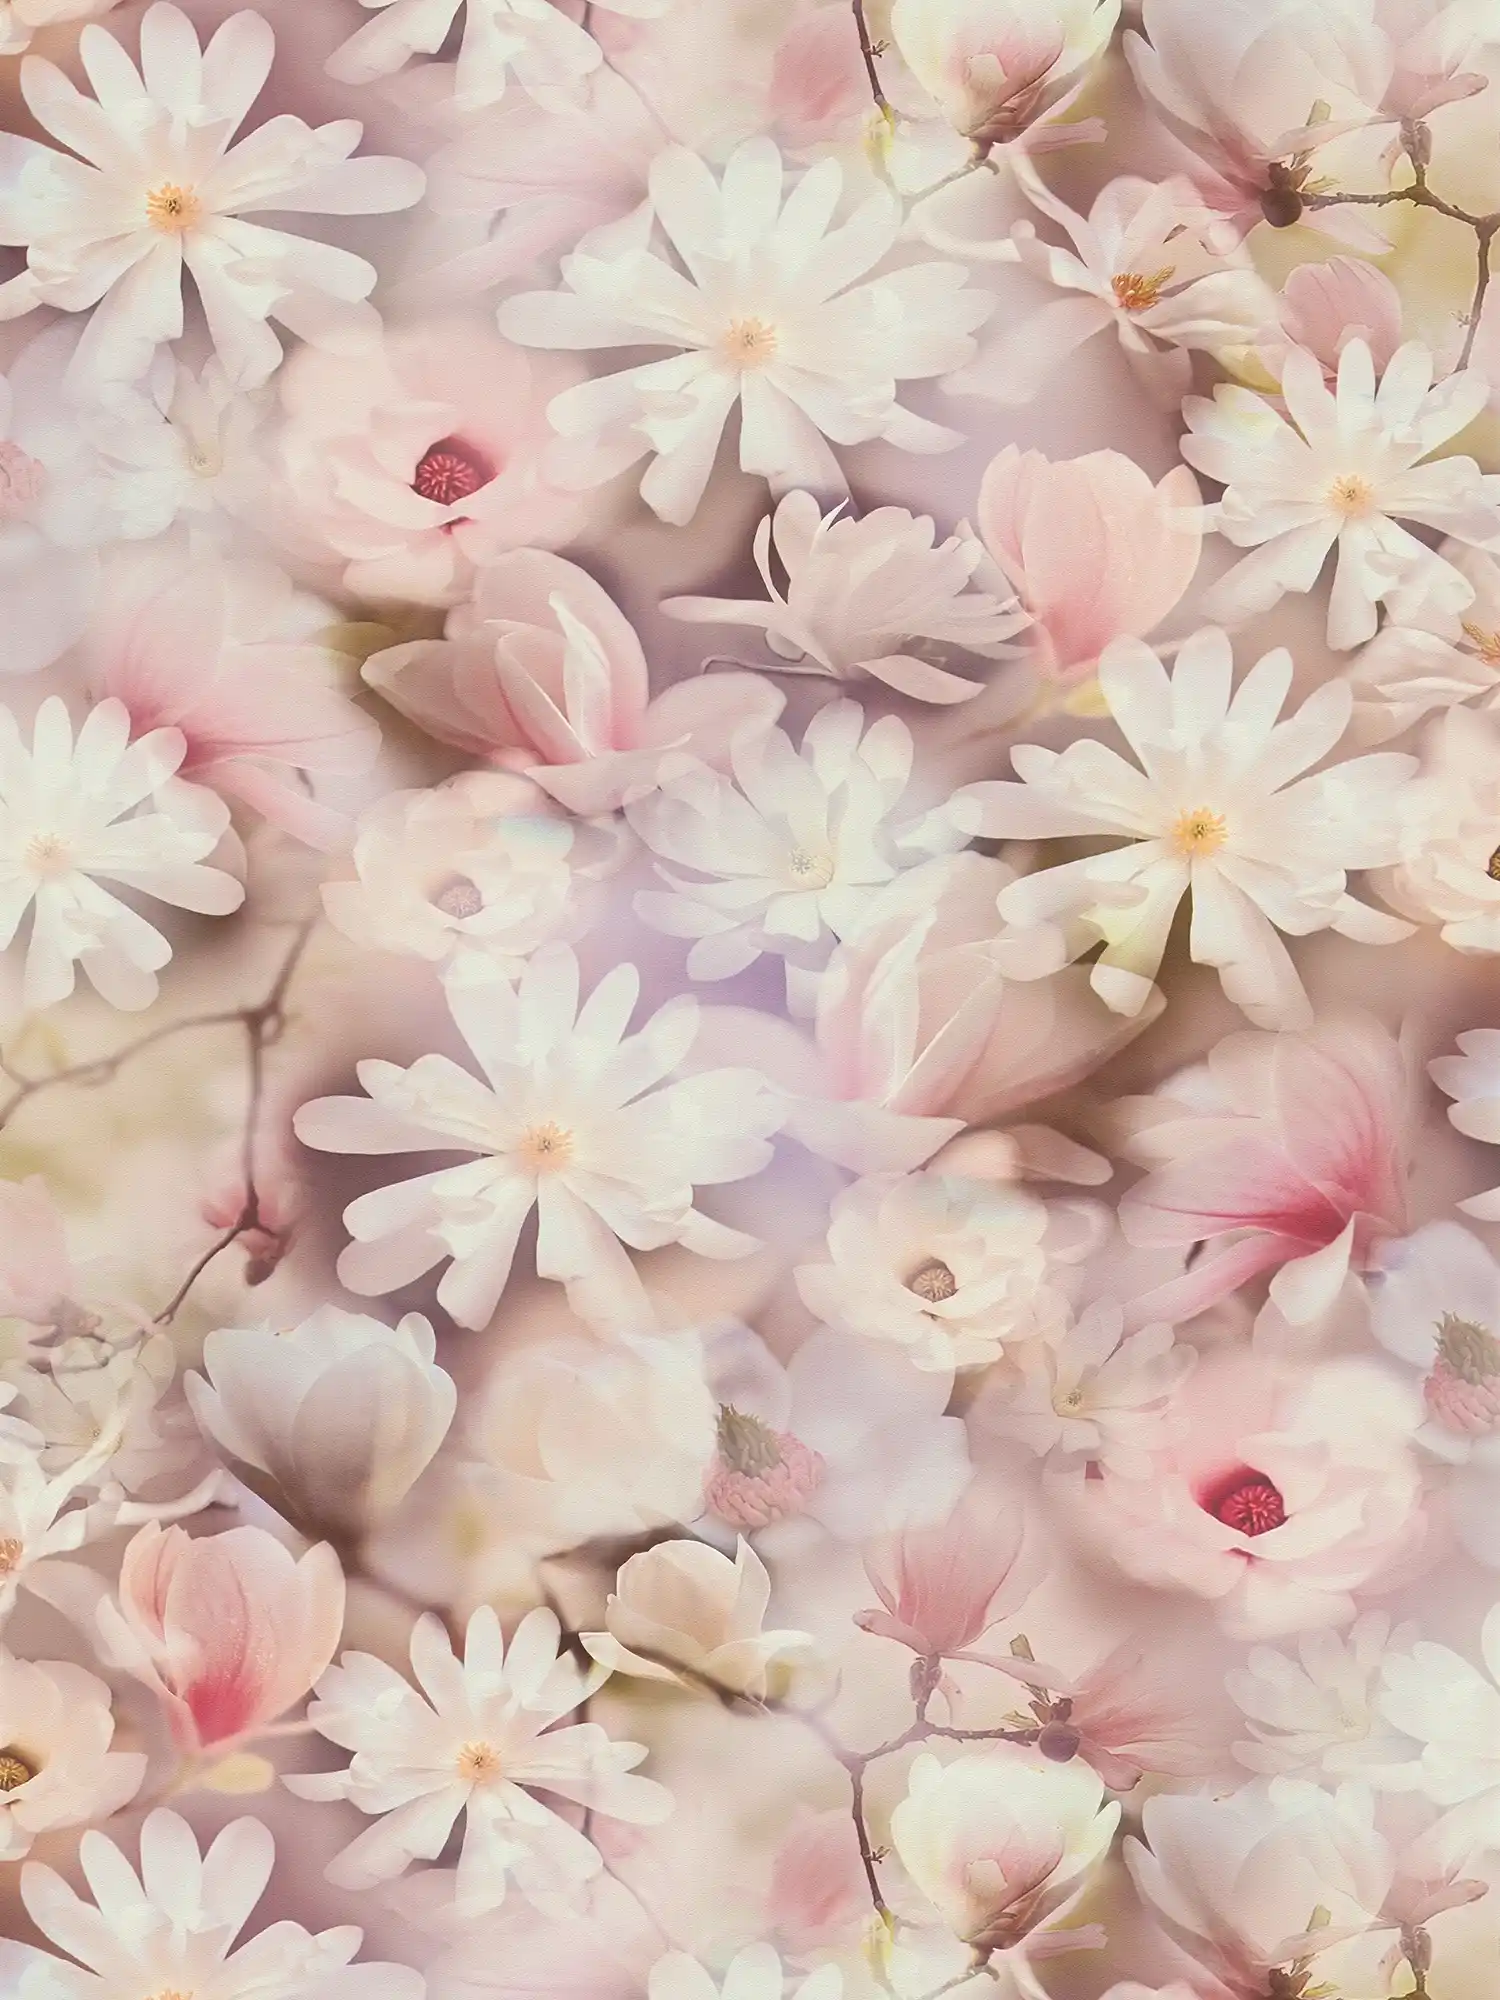 Floral wallpaper collage design in pink and white
